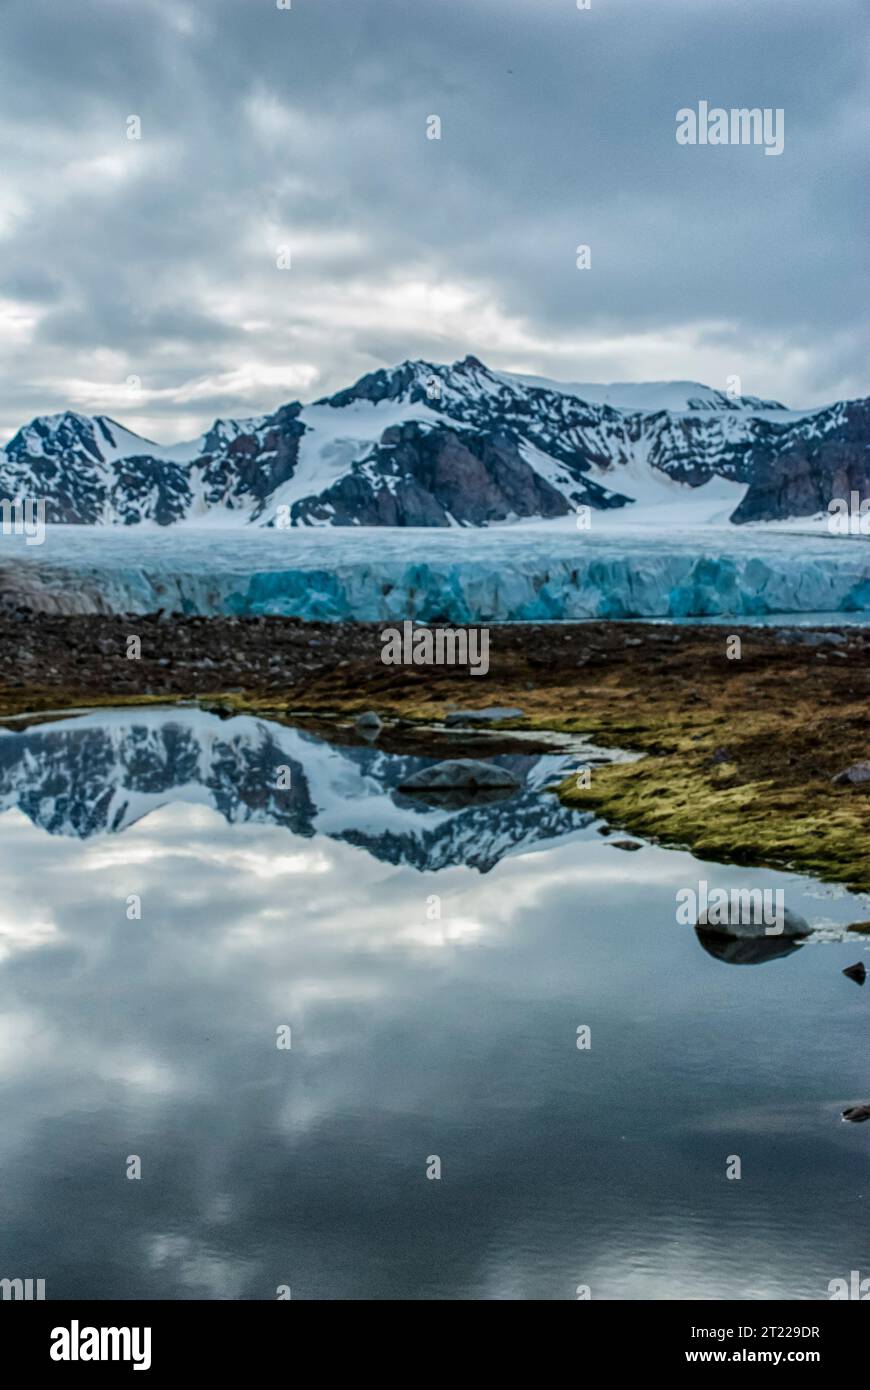 Fjortende Julibreen, 14th July Glacier and reflection, Svalbard, Norway Stock Photo